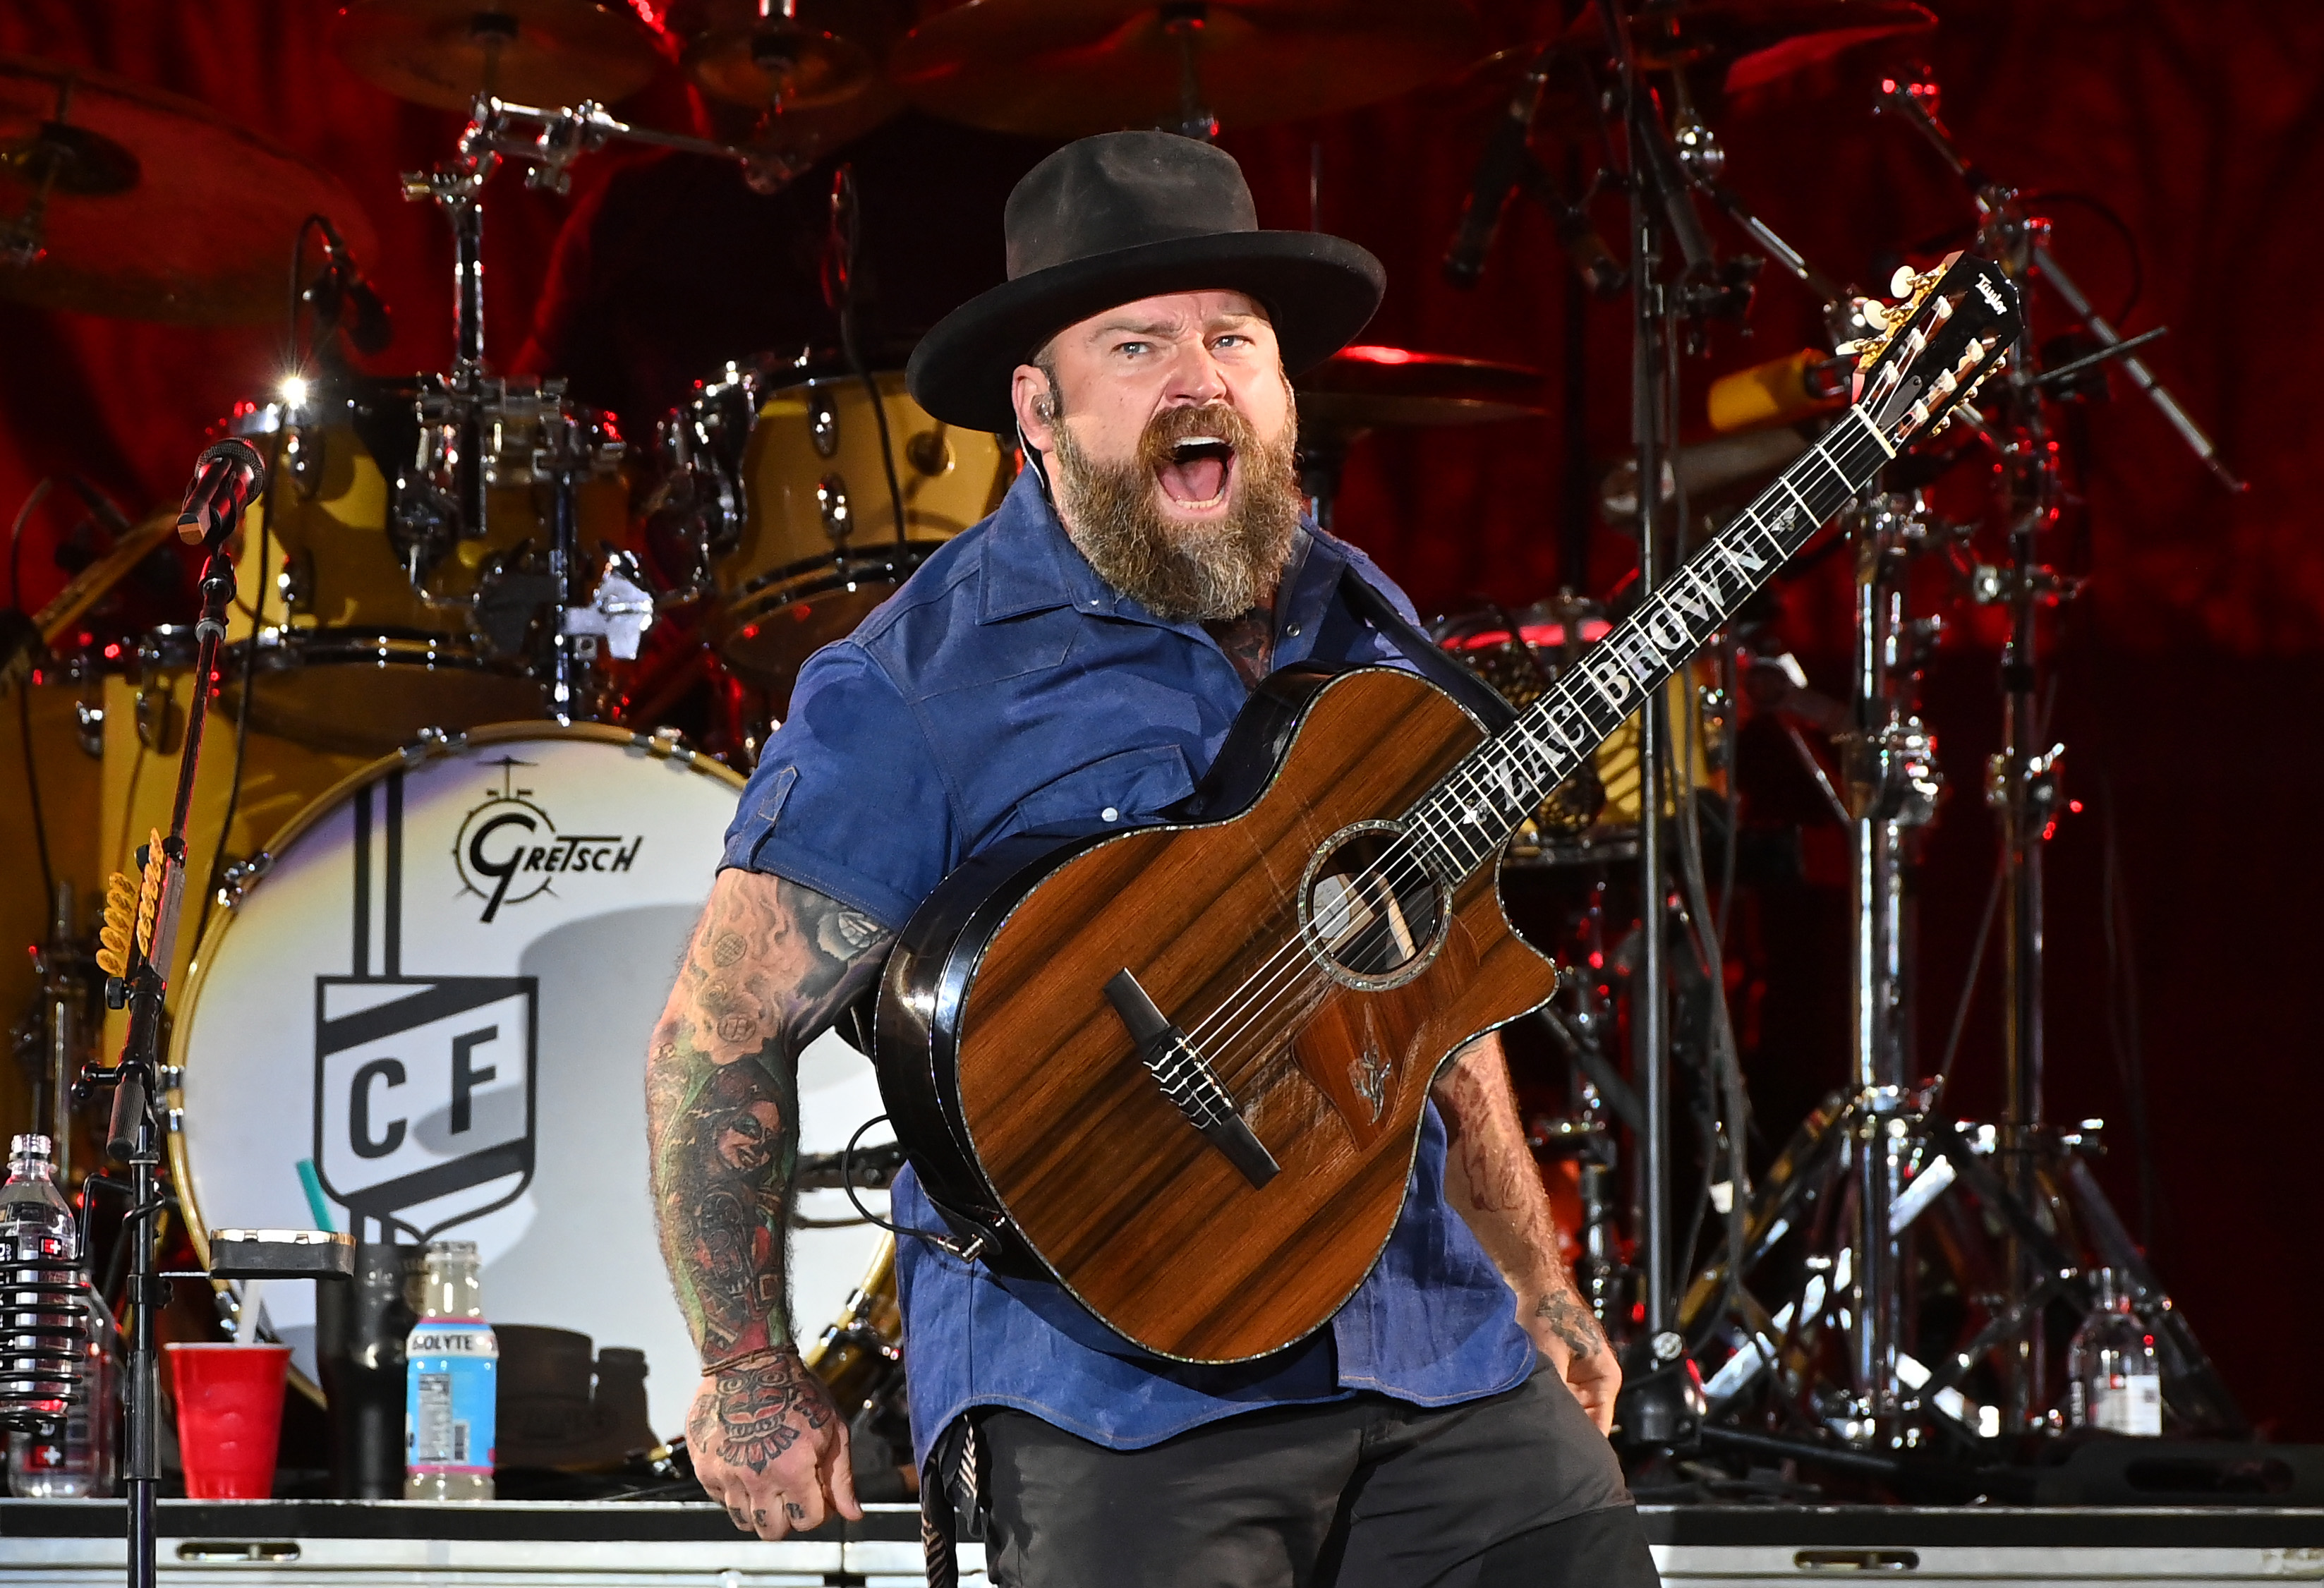 Zac Brown Band tour 2022 How to buy discounted tickets, schedule, dates